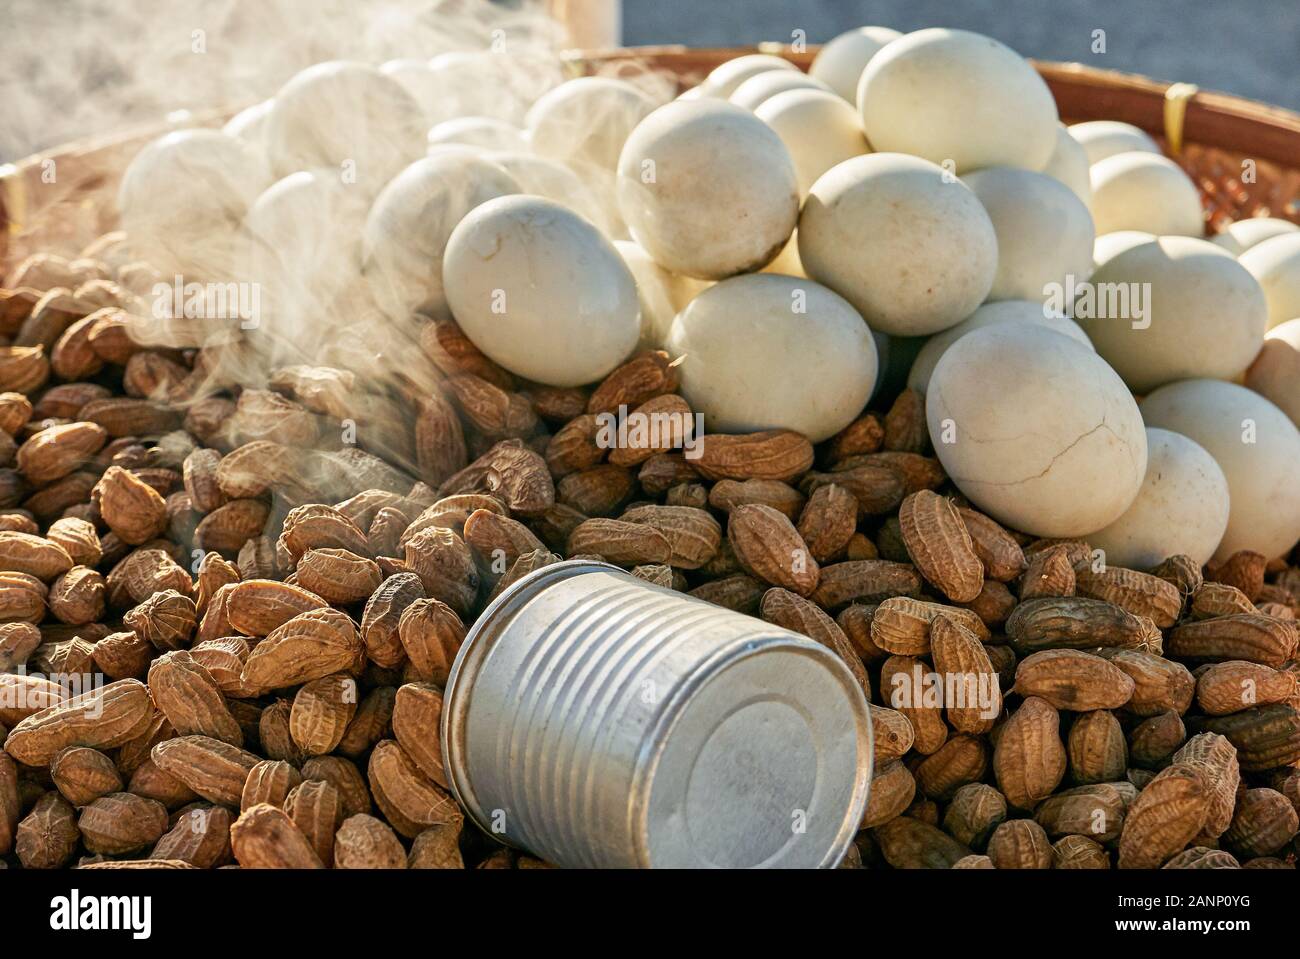 Close-up of steamed peanuts and white boiled eggs for sale on a native bamboo tray with a measuring cup, seen in the Philippines at late afternoon Stock Photo